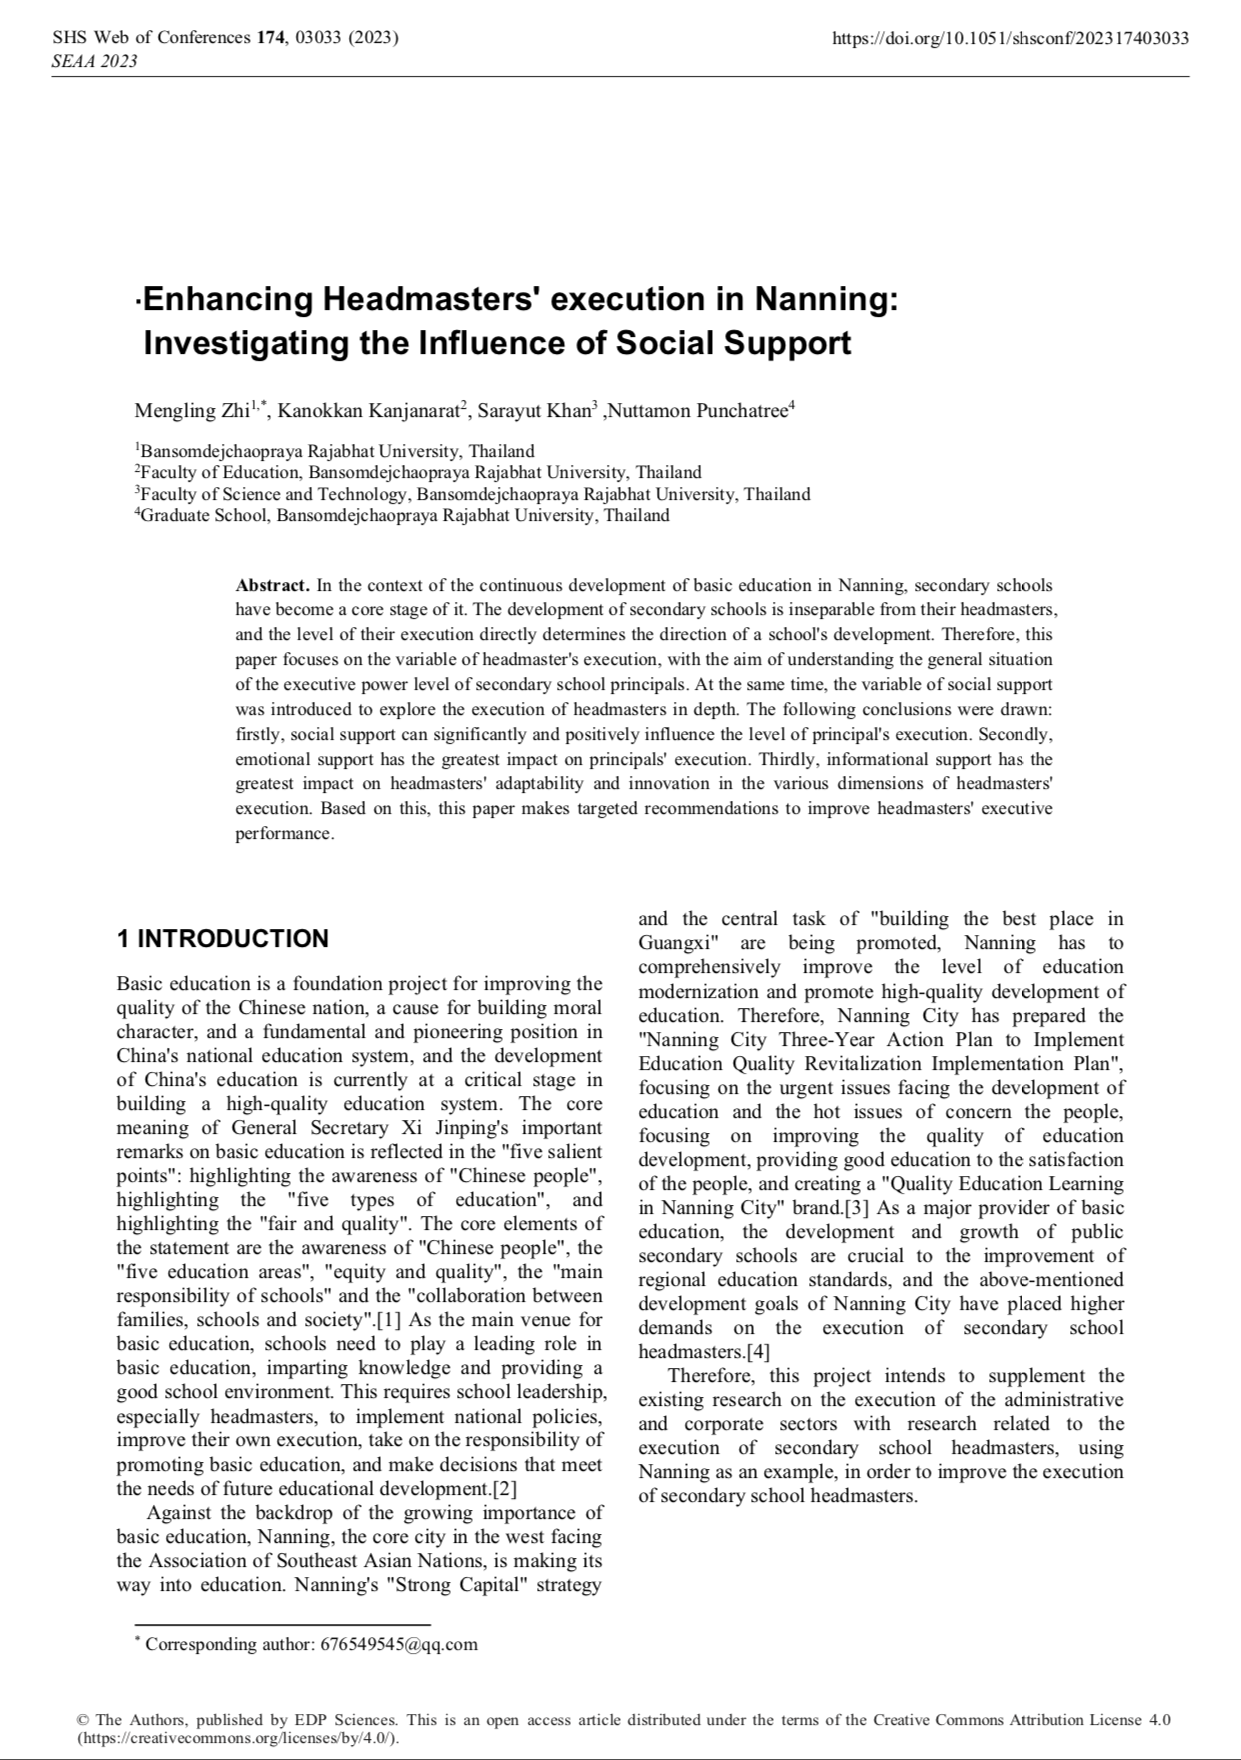 Enhancing Headmasters’ execution in Nanning: Investigating the Influence of Social Support